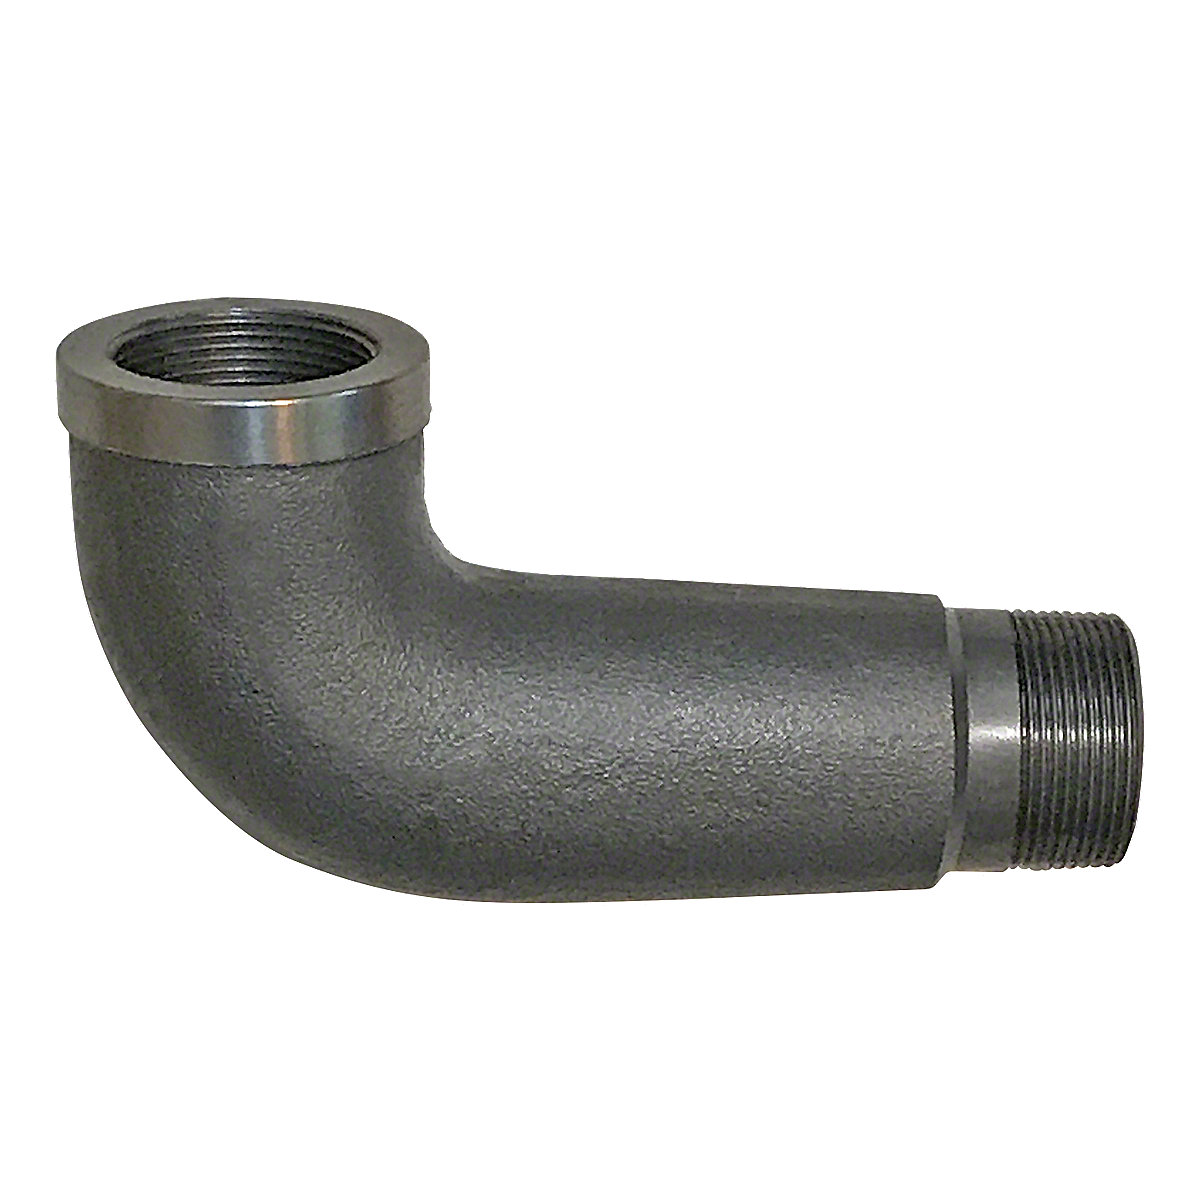 EXHAUST ELBOW -  Farmall 504, 2504, 3514 (GAS ONLY, 153 INCH3 )